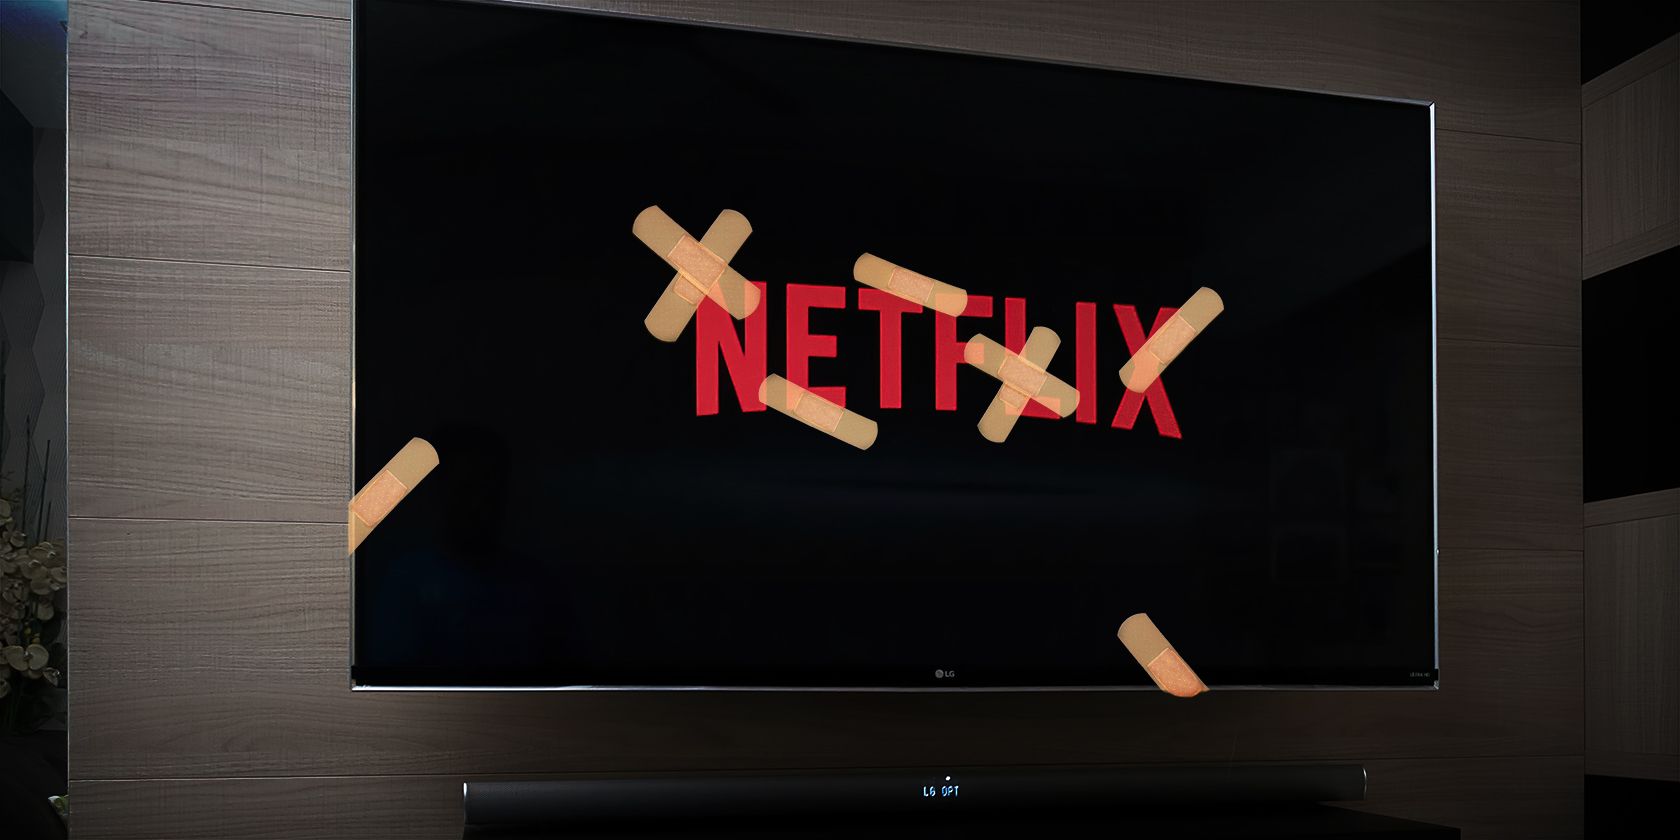 netflix logo on screen with sticking plasters